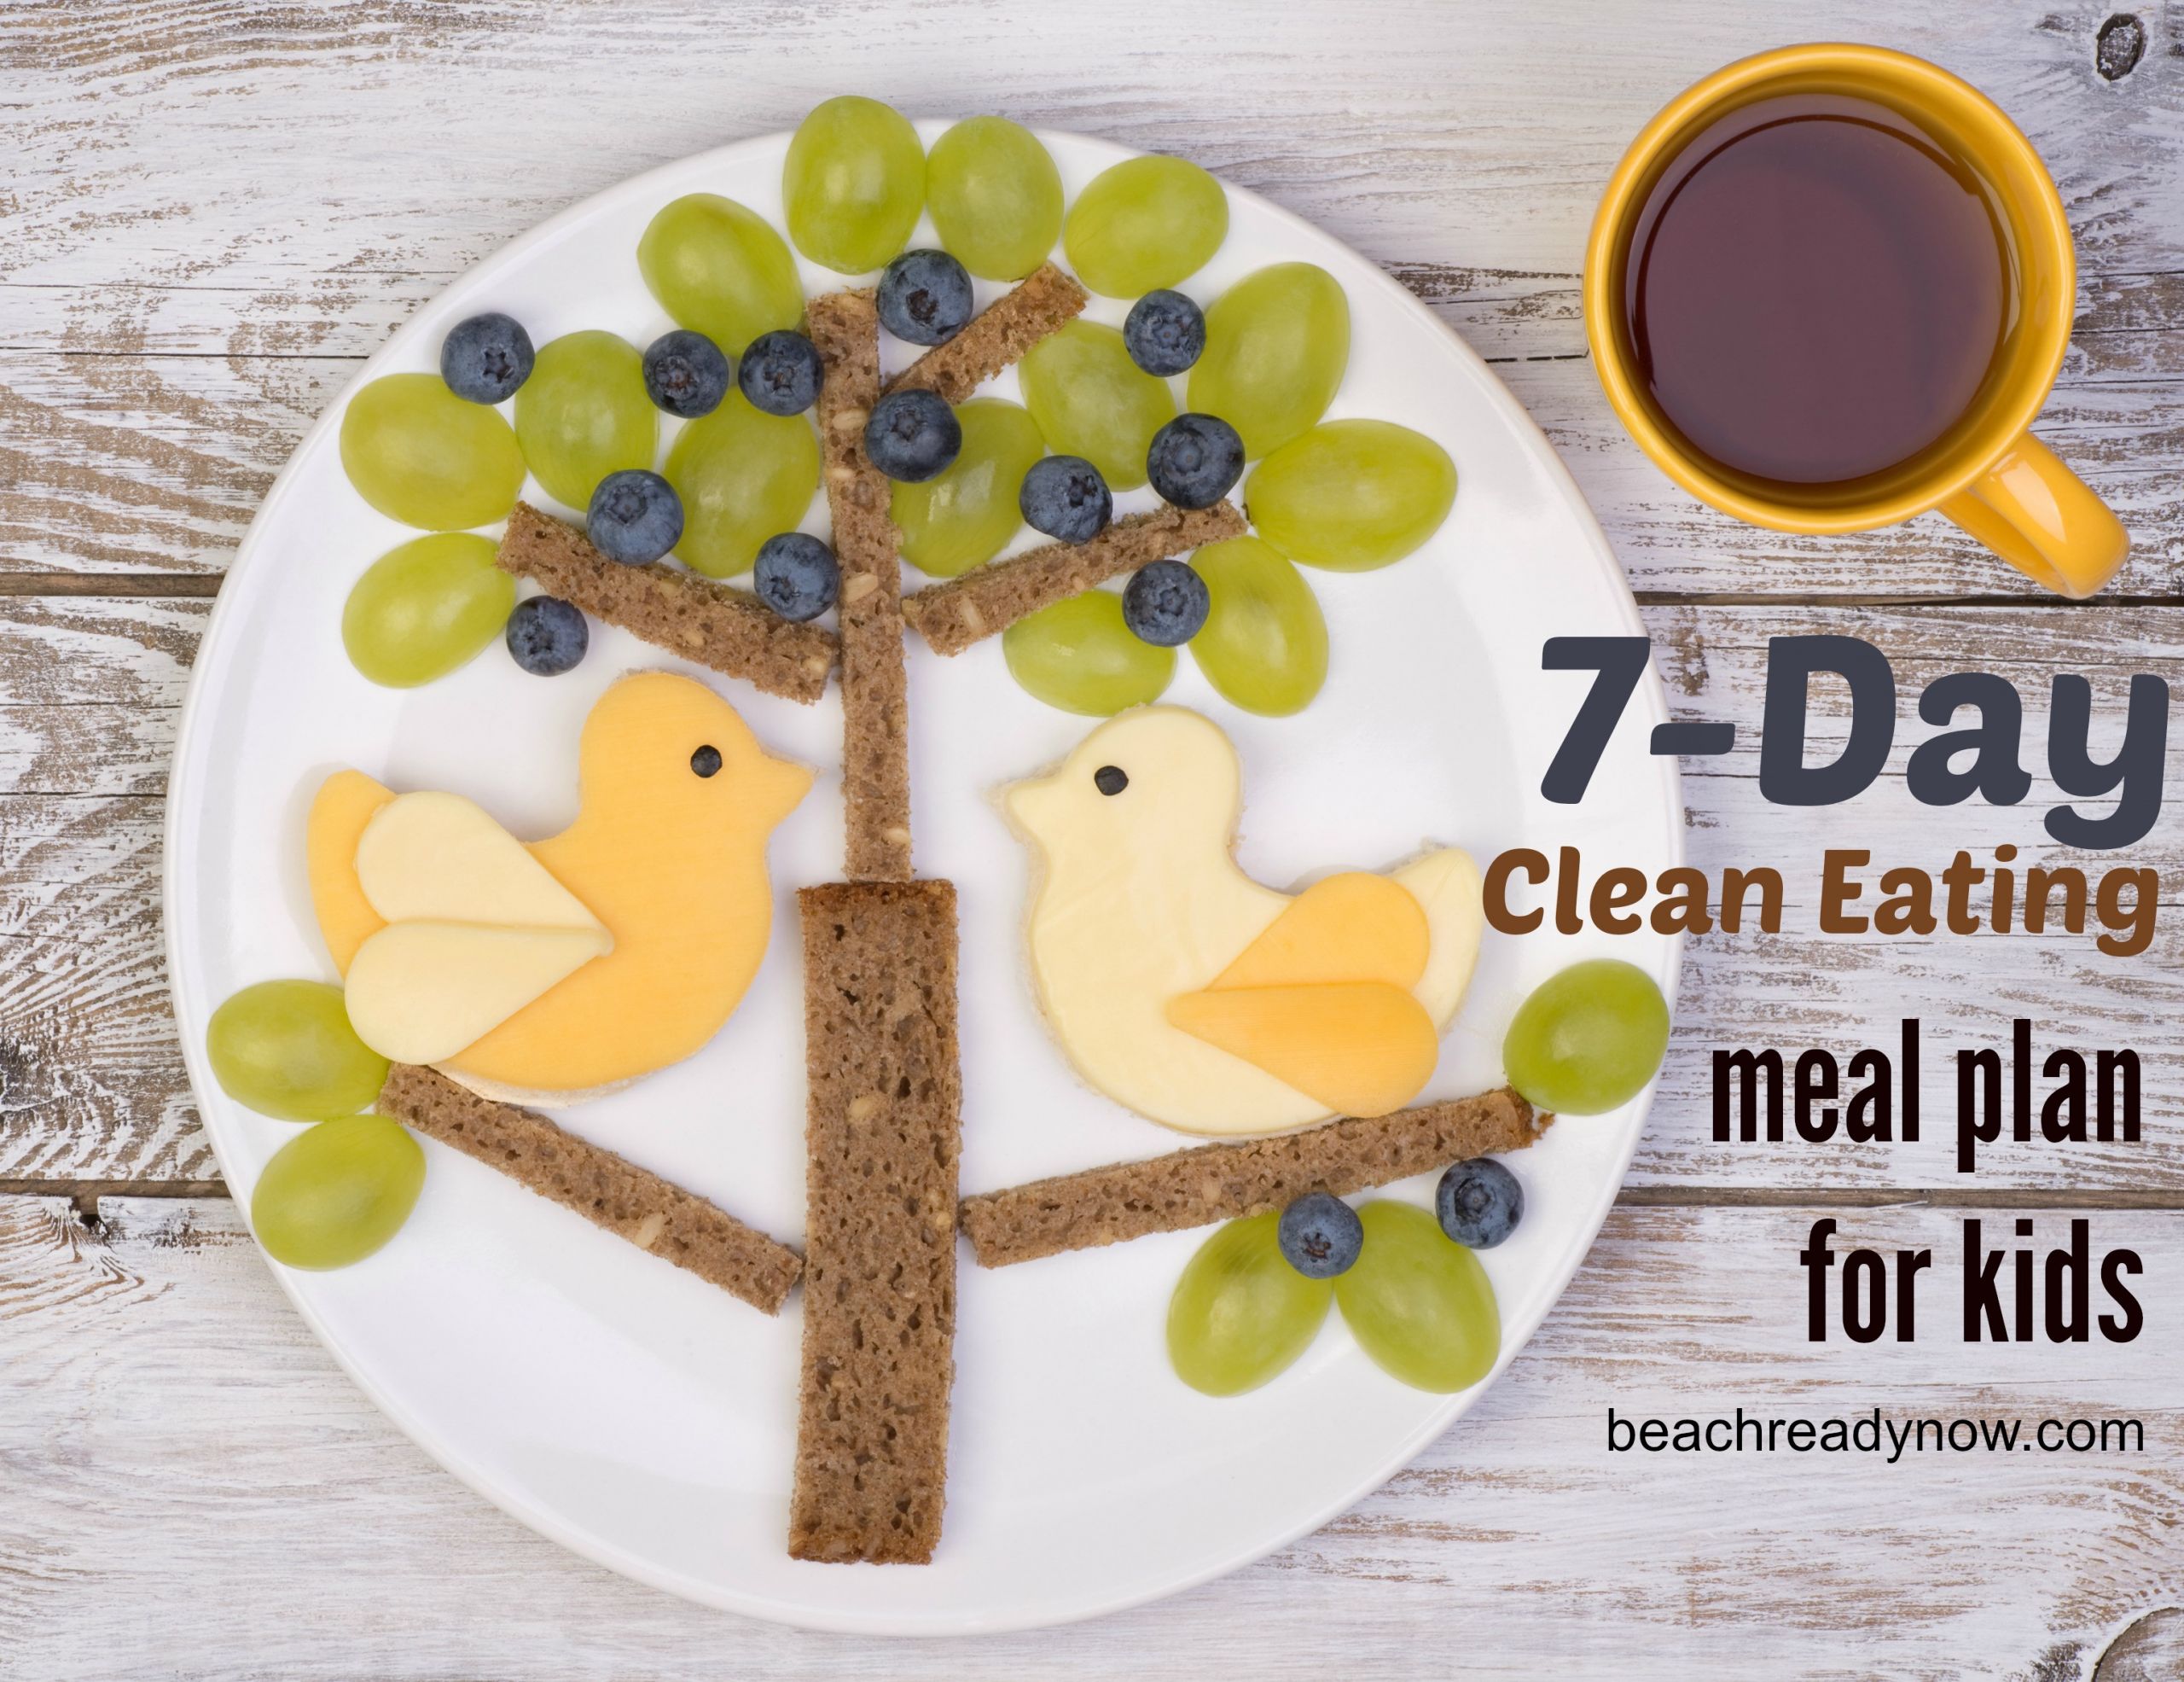 Kid Friendly Clean Eating Meal Plans
 7 Day Clean Eating Meal Plan for Kids Beach Ready Now